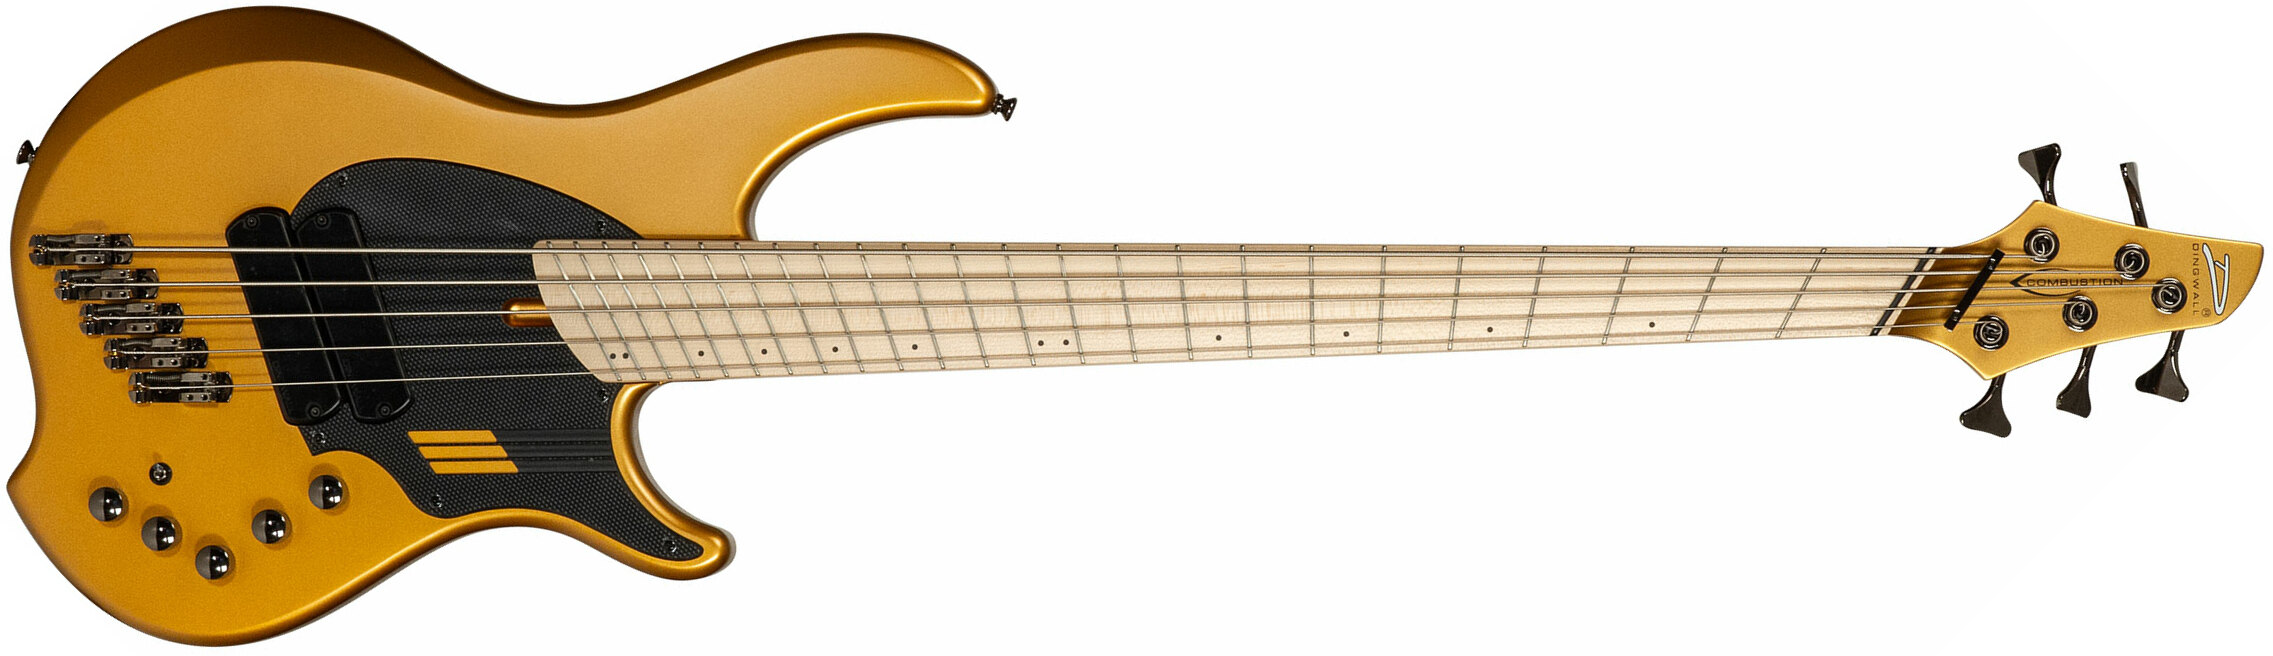 Dingwall Adam Nolly Getgood Ng2 5c Signature 2pu Active Mn - Gold Matte - Basse Électrique Solid Body - Main picture